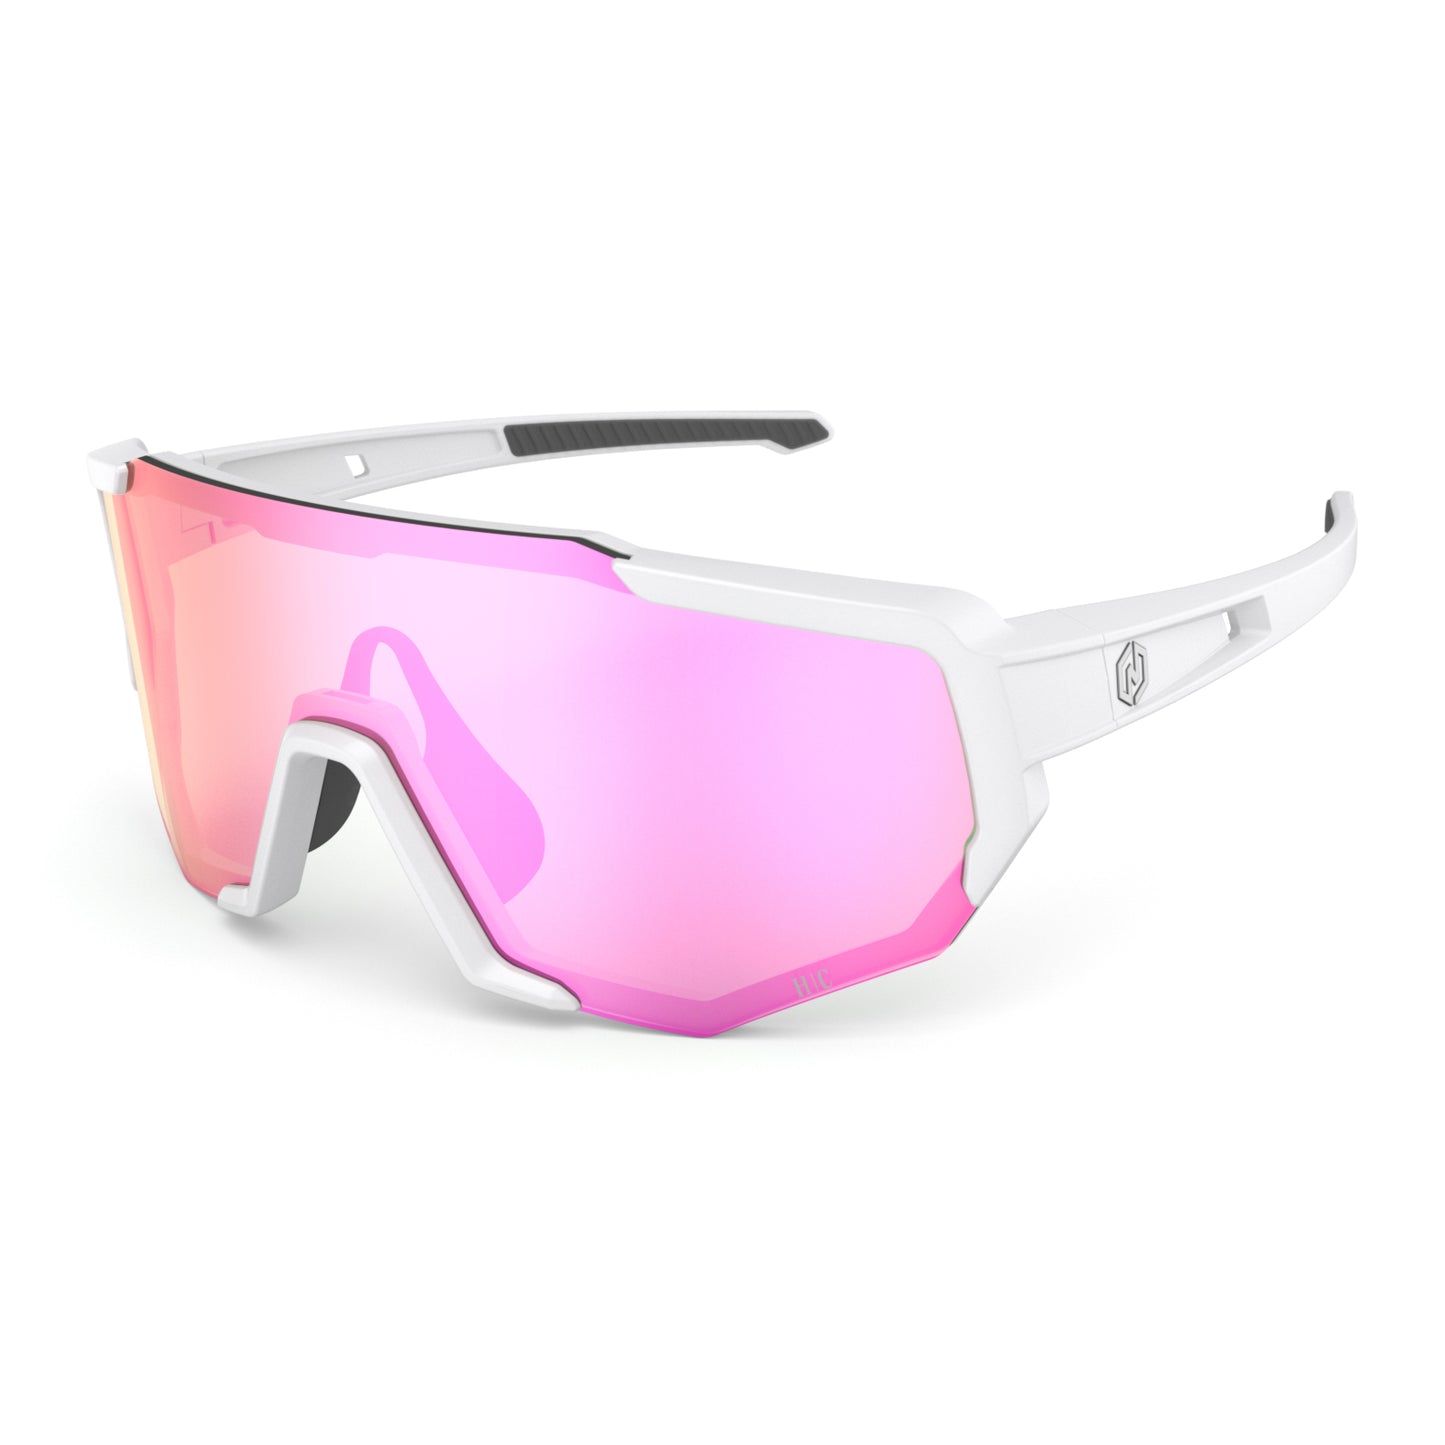 Kanon Diamant™ Sunglasses/Cycling/Running + 2 Replacement Lenses